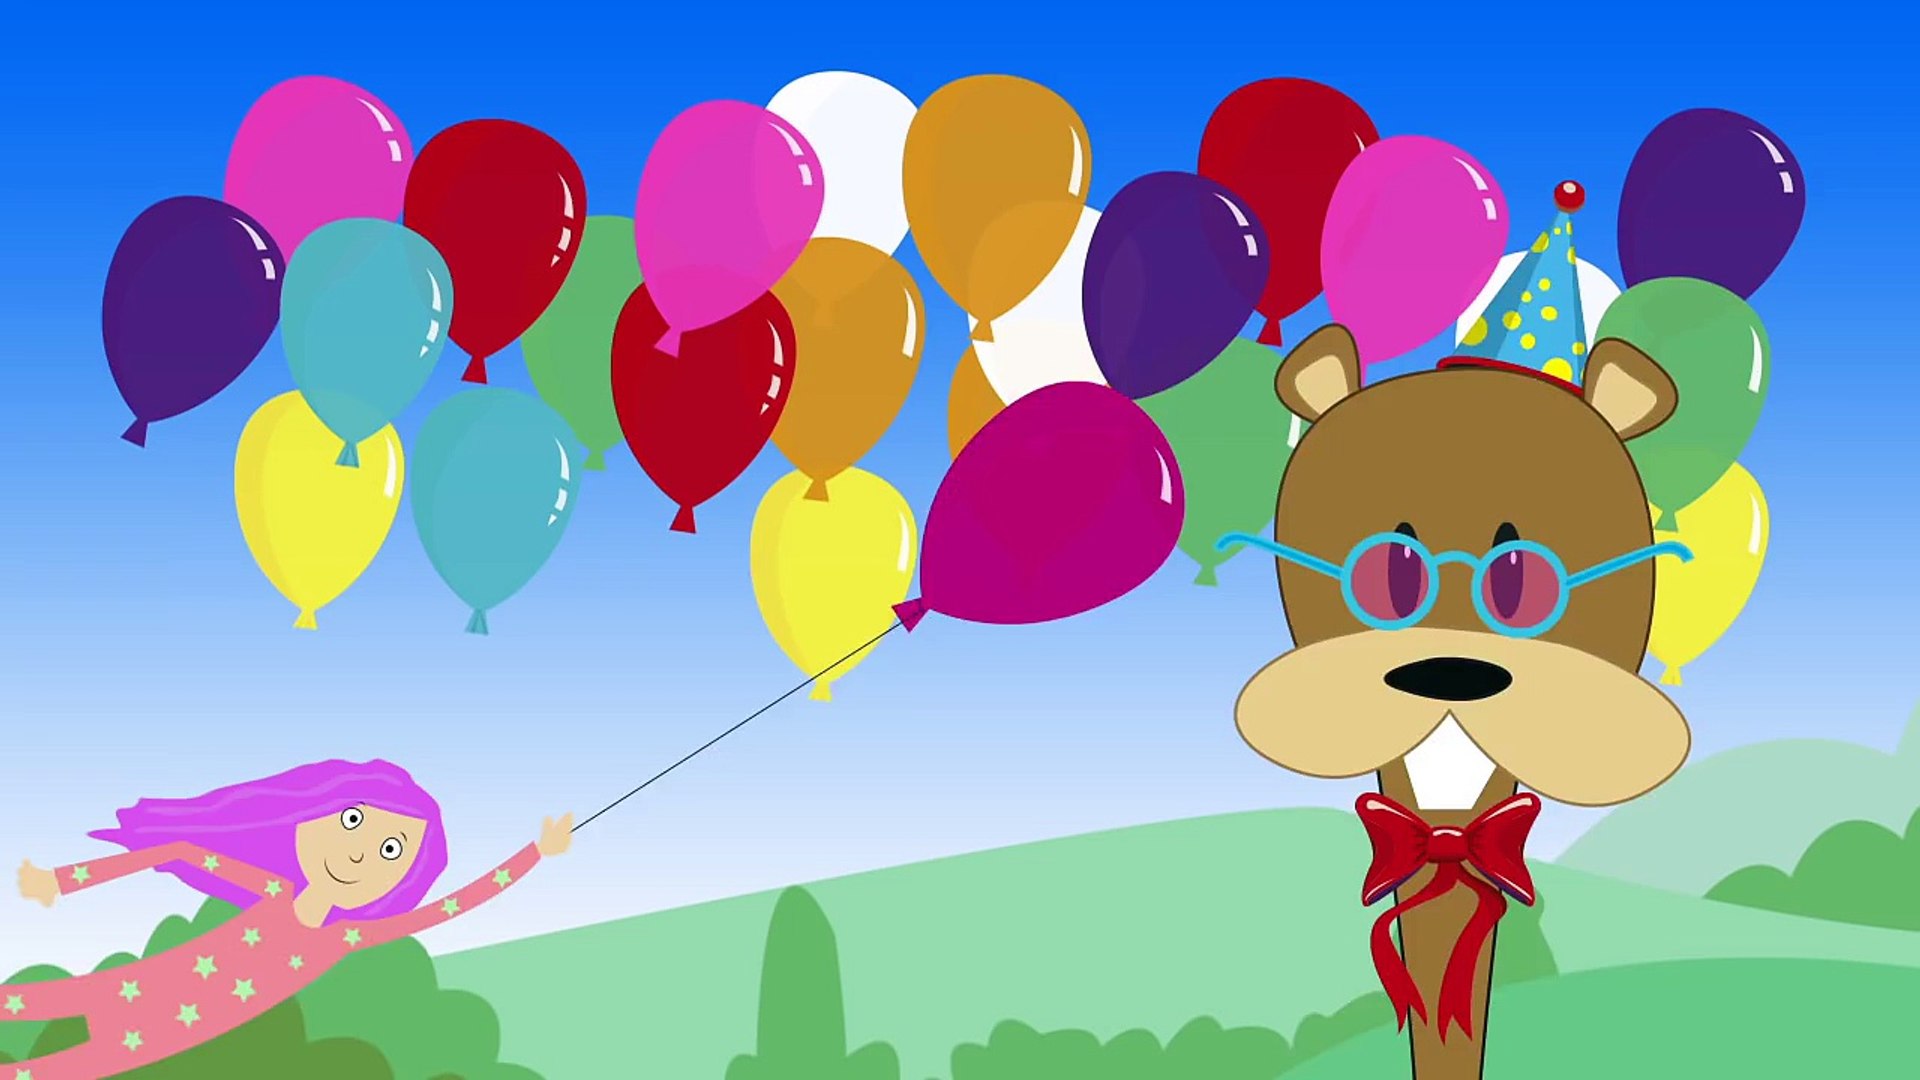 Pretty Balloons (balloon song for learning colors) - Dailymotion Video